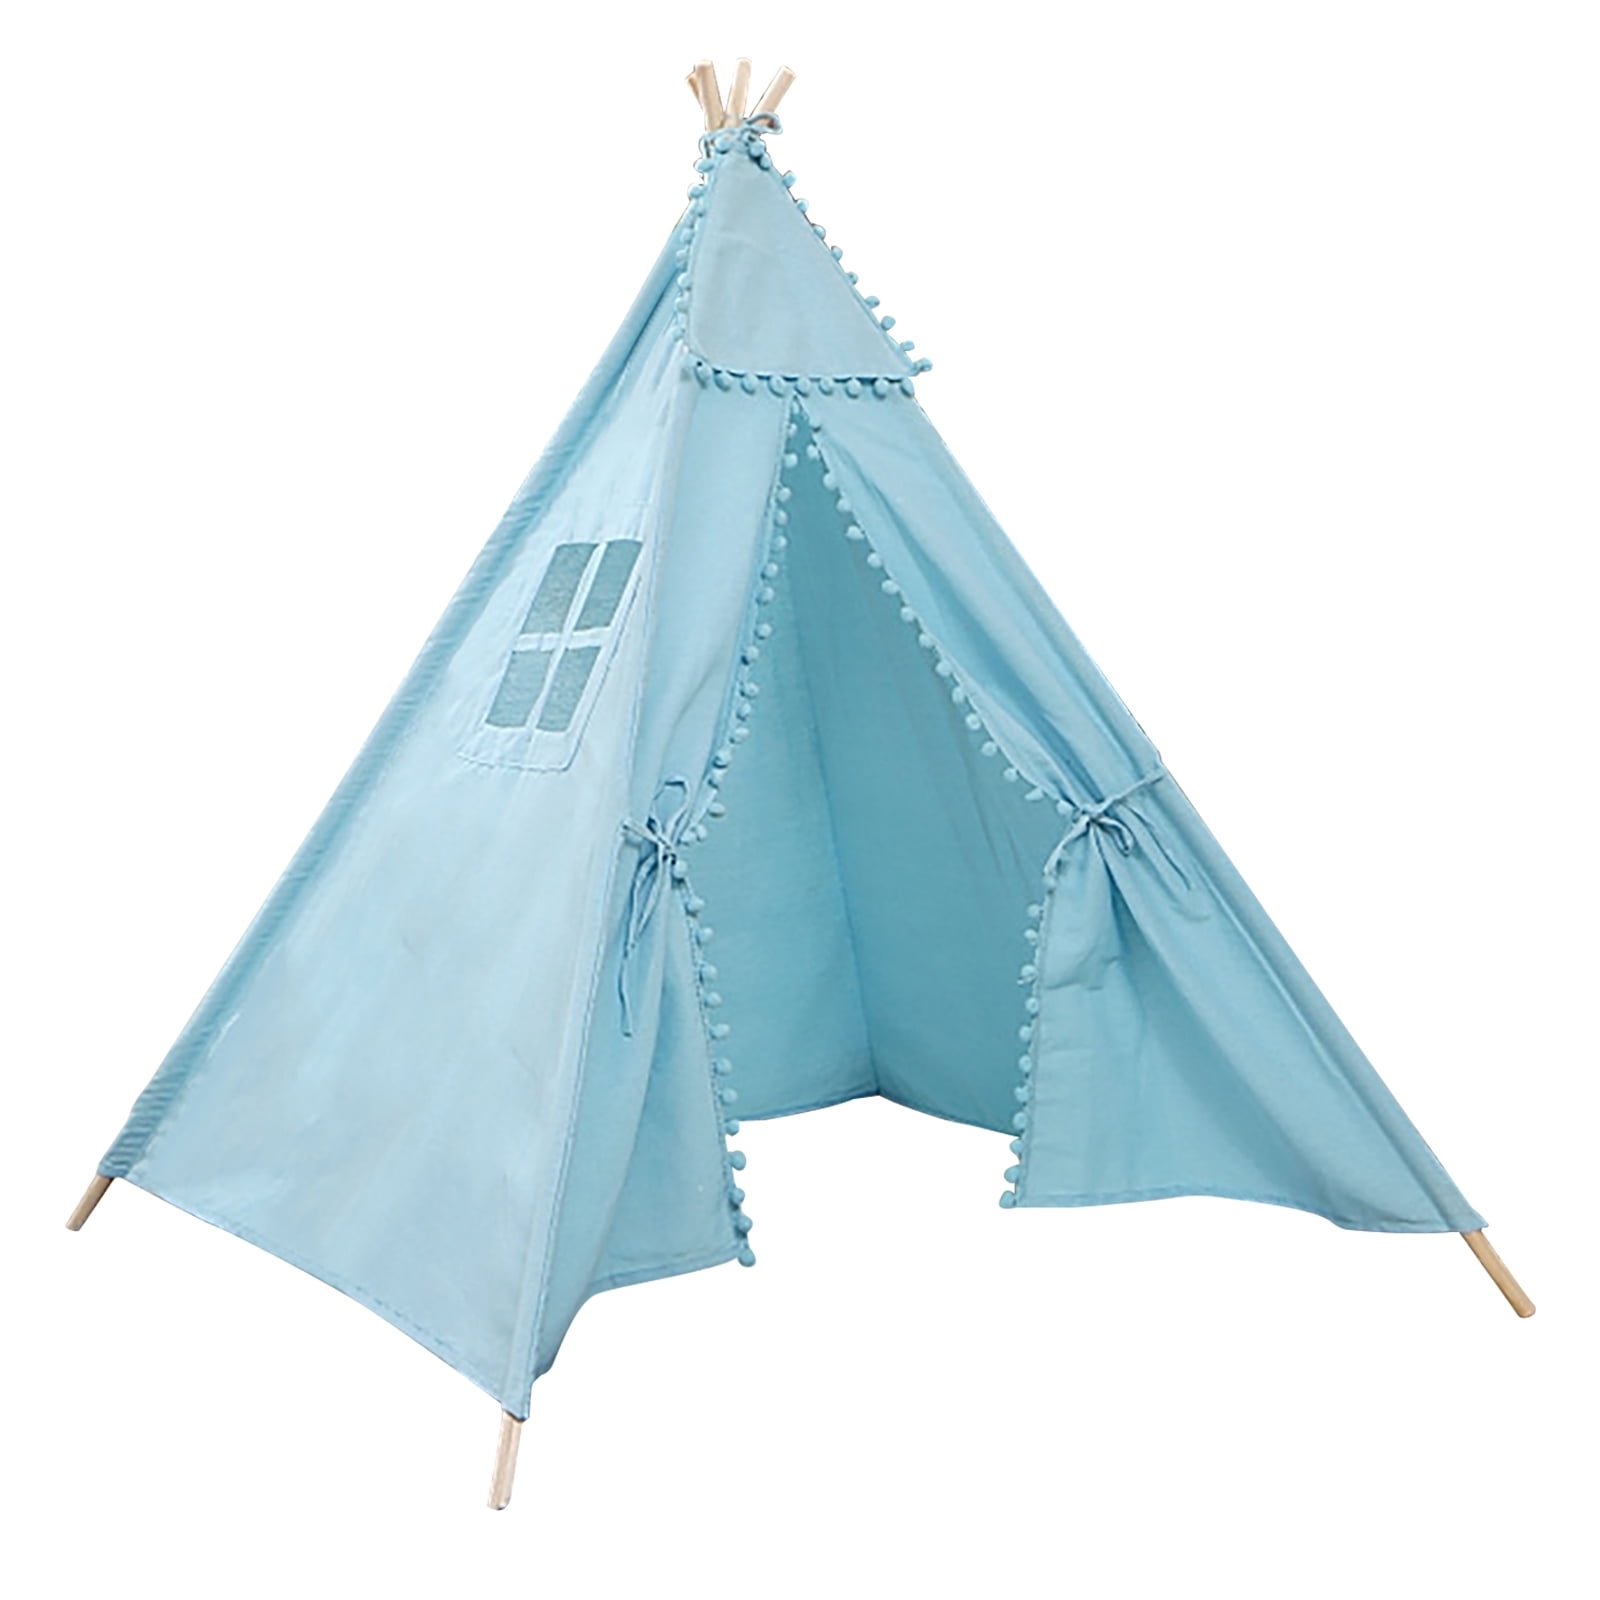 Window Teepee Play Tent Cubby House for Toddlers Children Natural Linen Cotton 